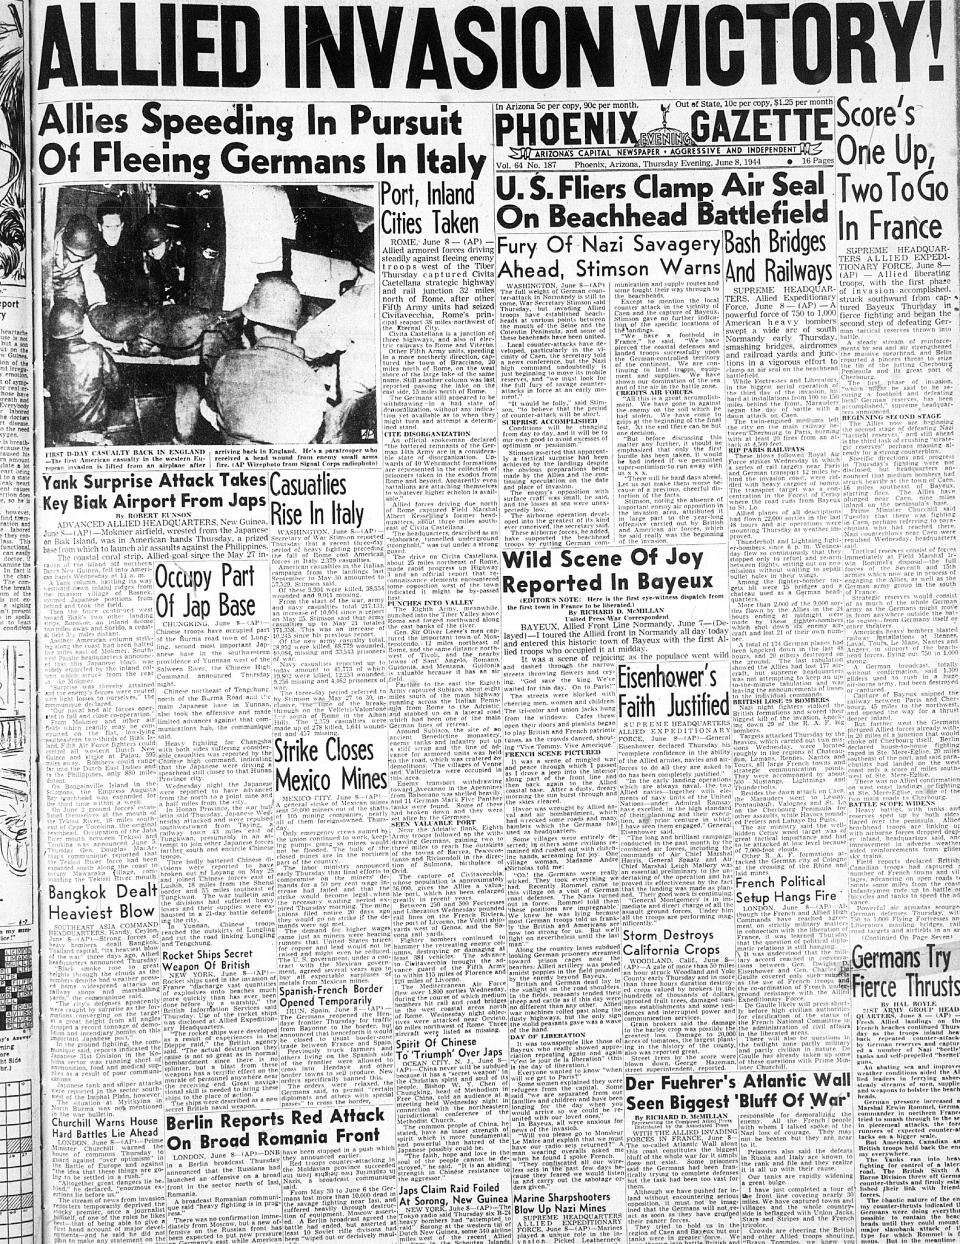 The front page of the Phoenix Gazette from June 8, 1944.